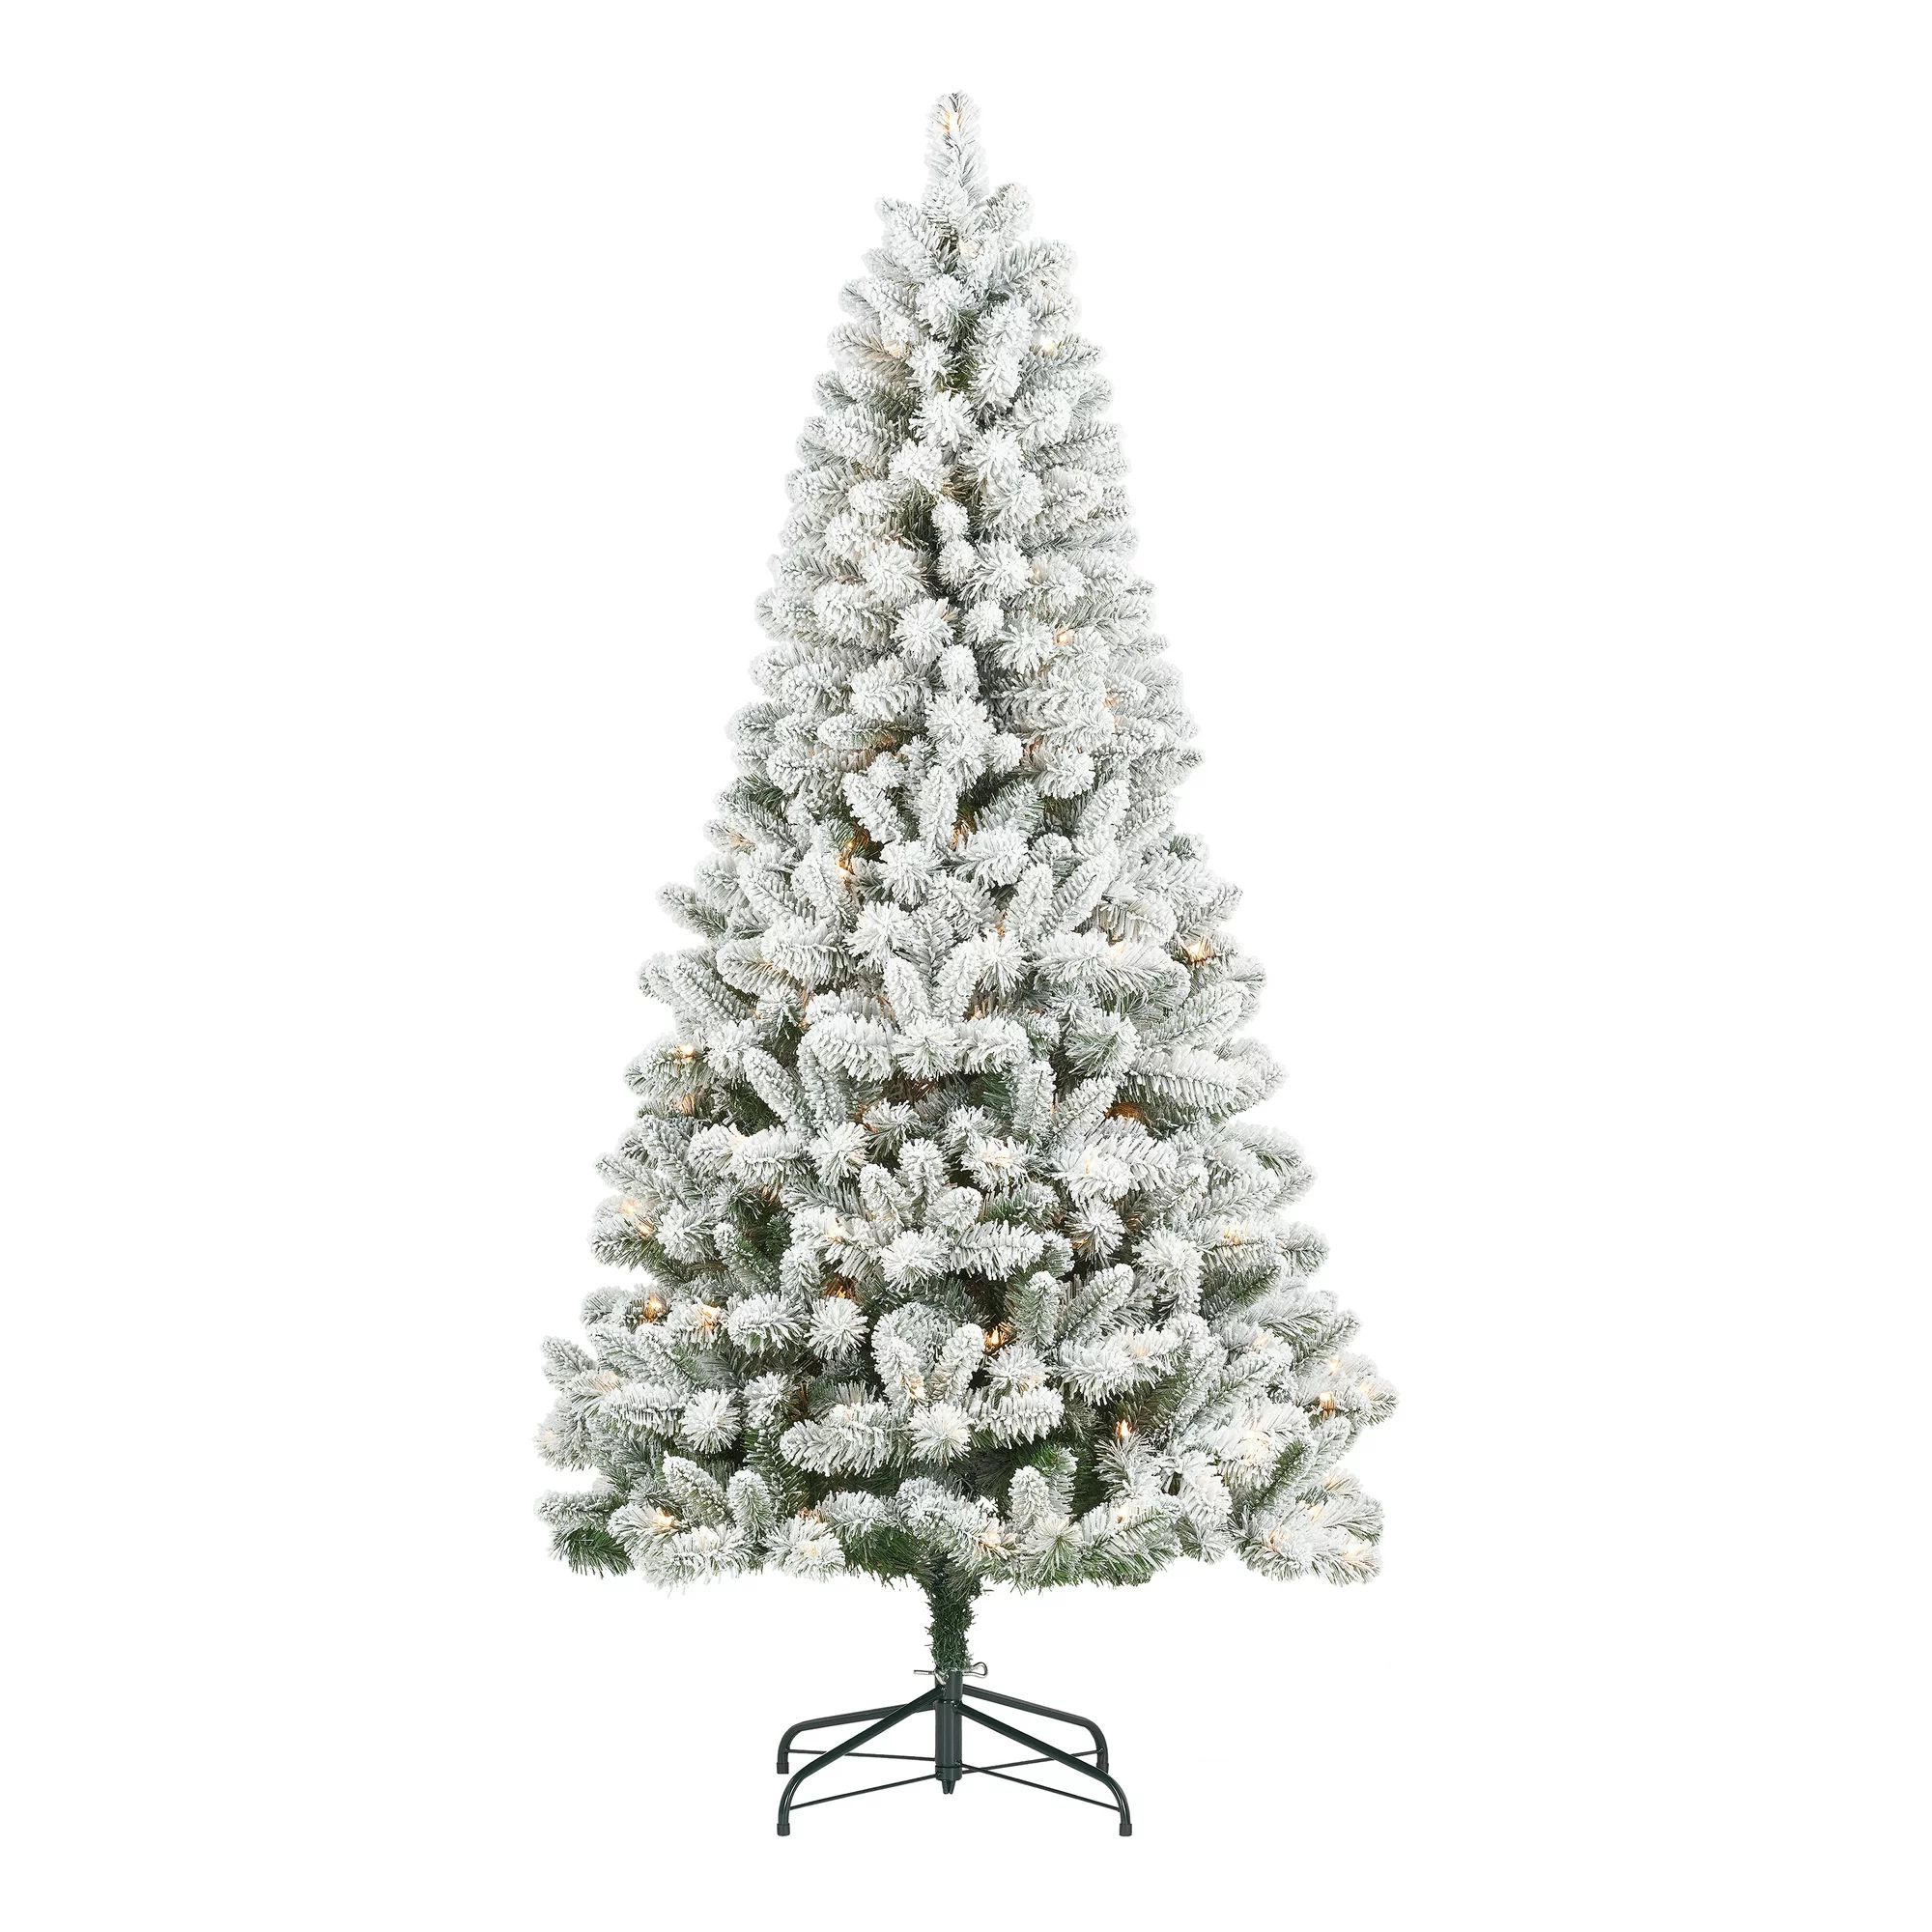 787 flocked branch tips250 pre-strung clear incandescent lightsMetal tree stand included | Walmart (US)